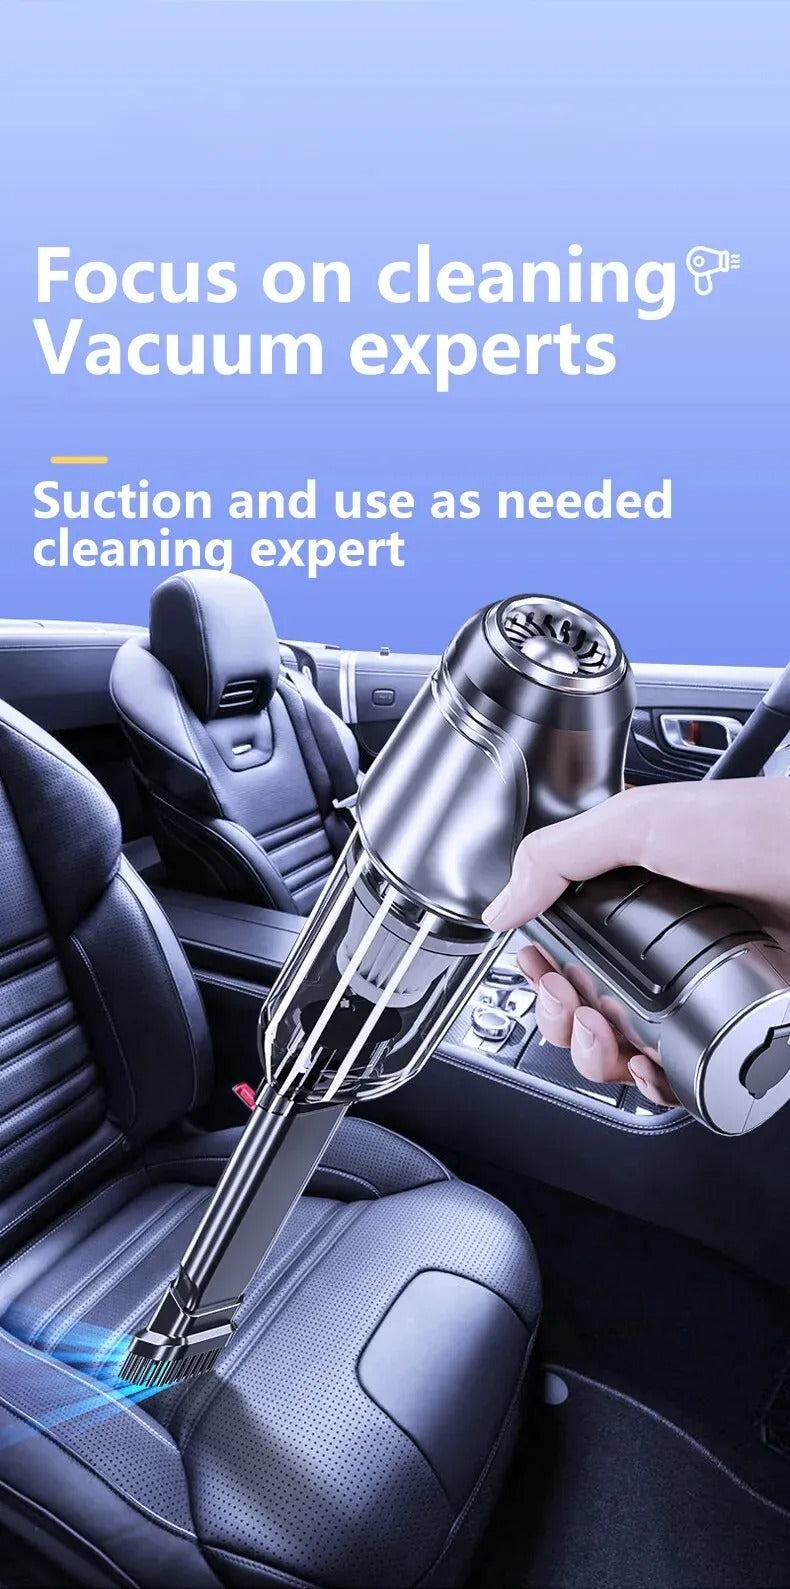 Powerful 95000Pa Rechargeable Car Portable Vacuum Cleaner